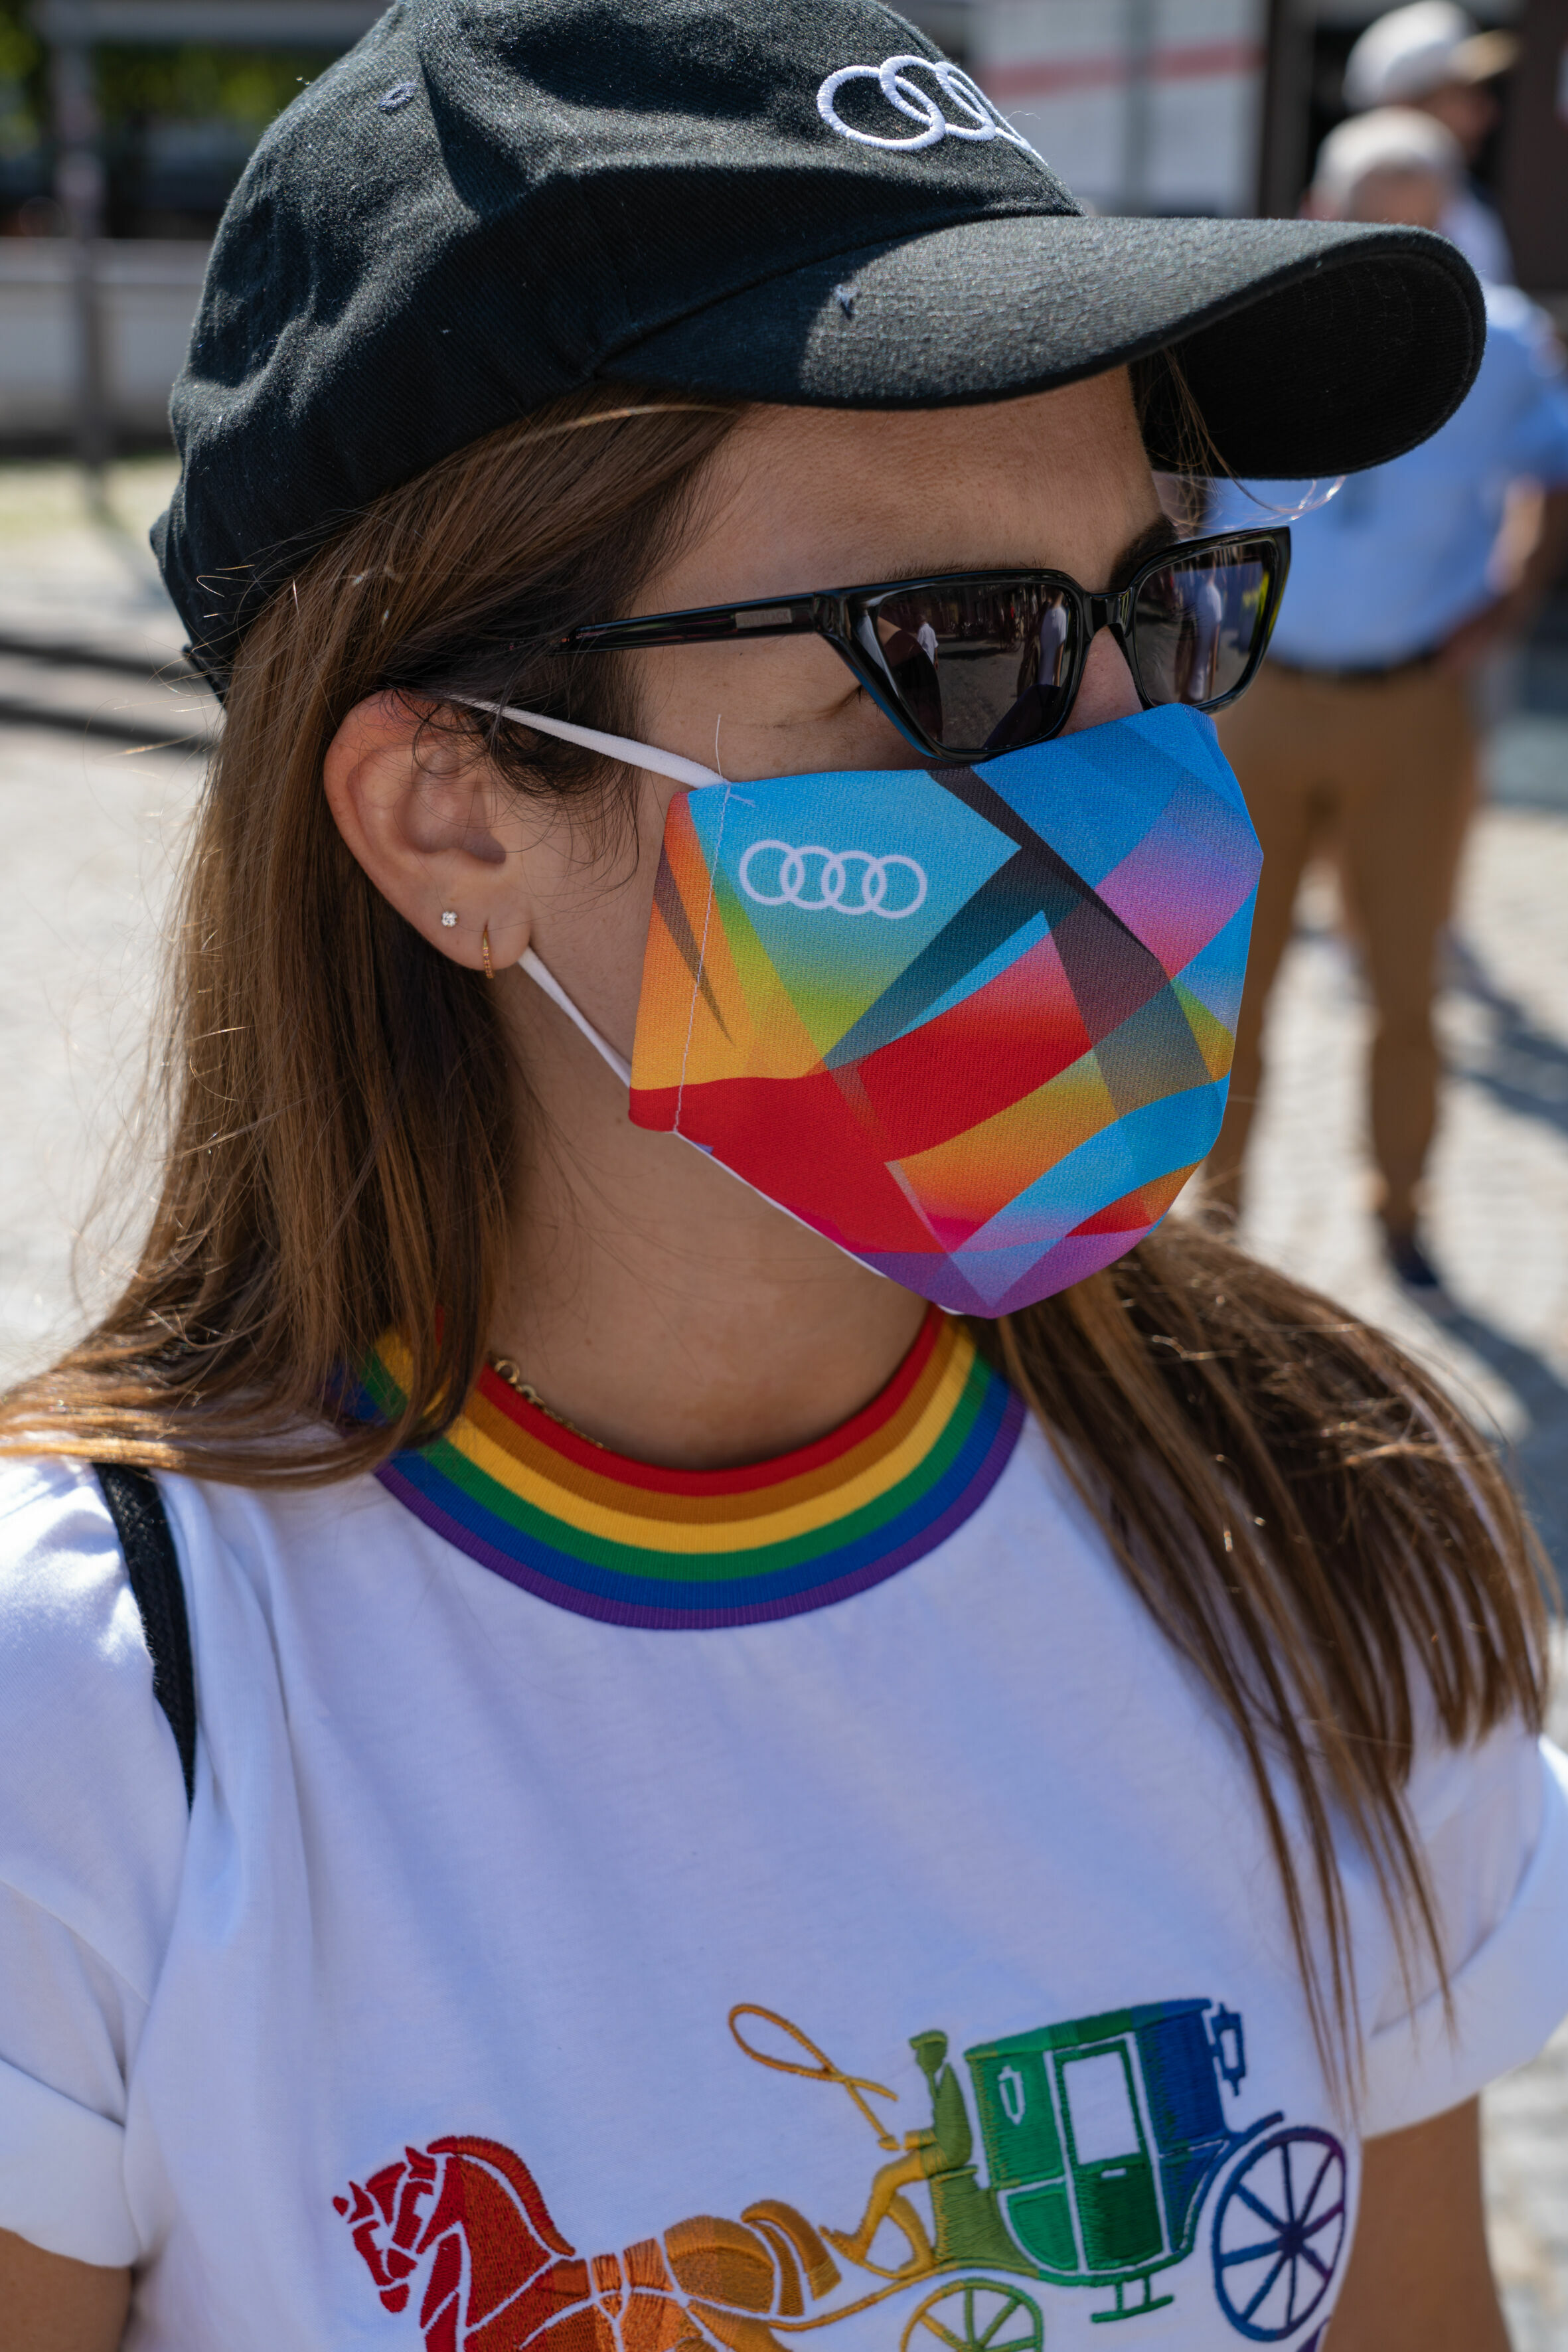 Audi shows its commitment to diversity at Christopher Street Day in Ingolstadt